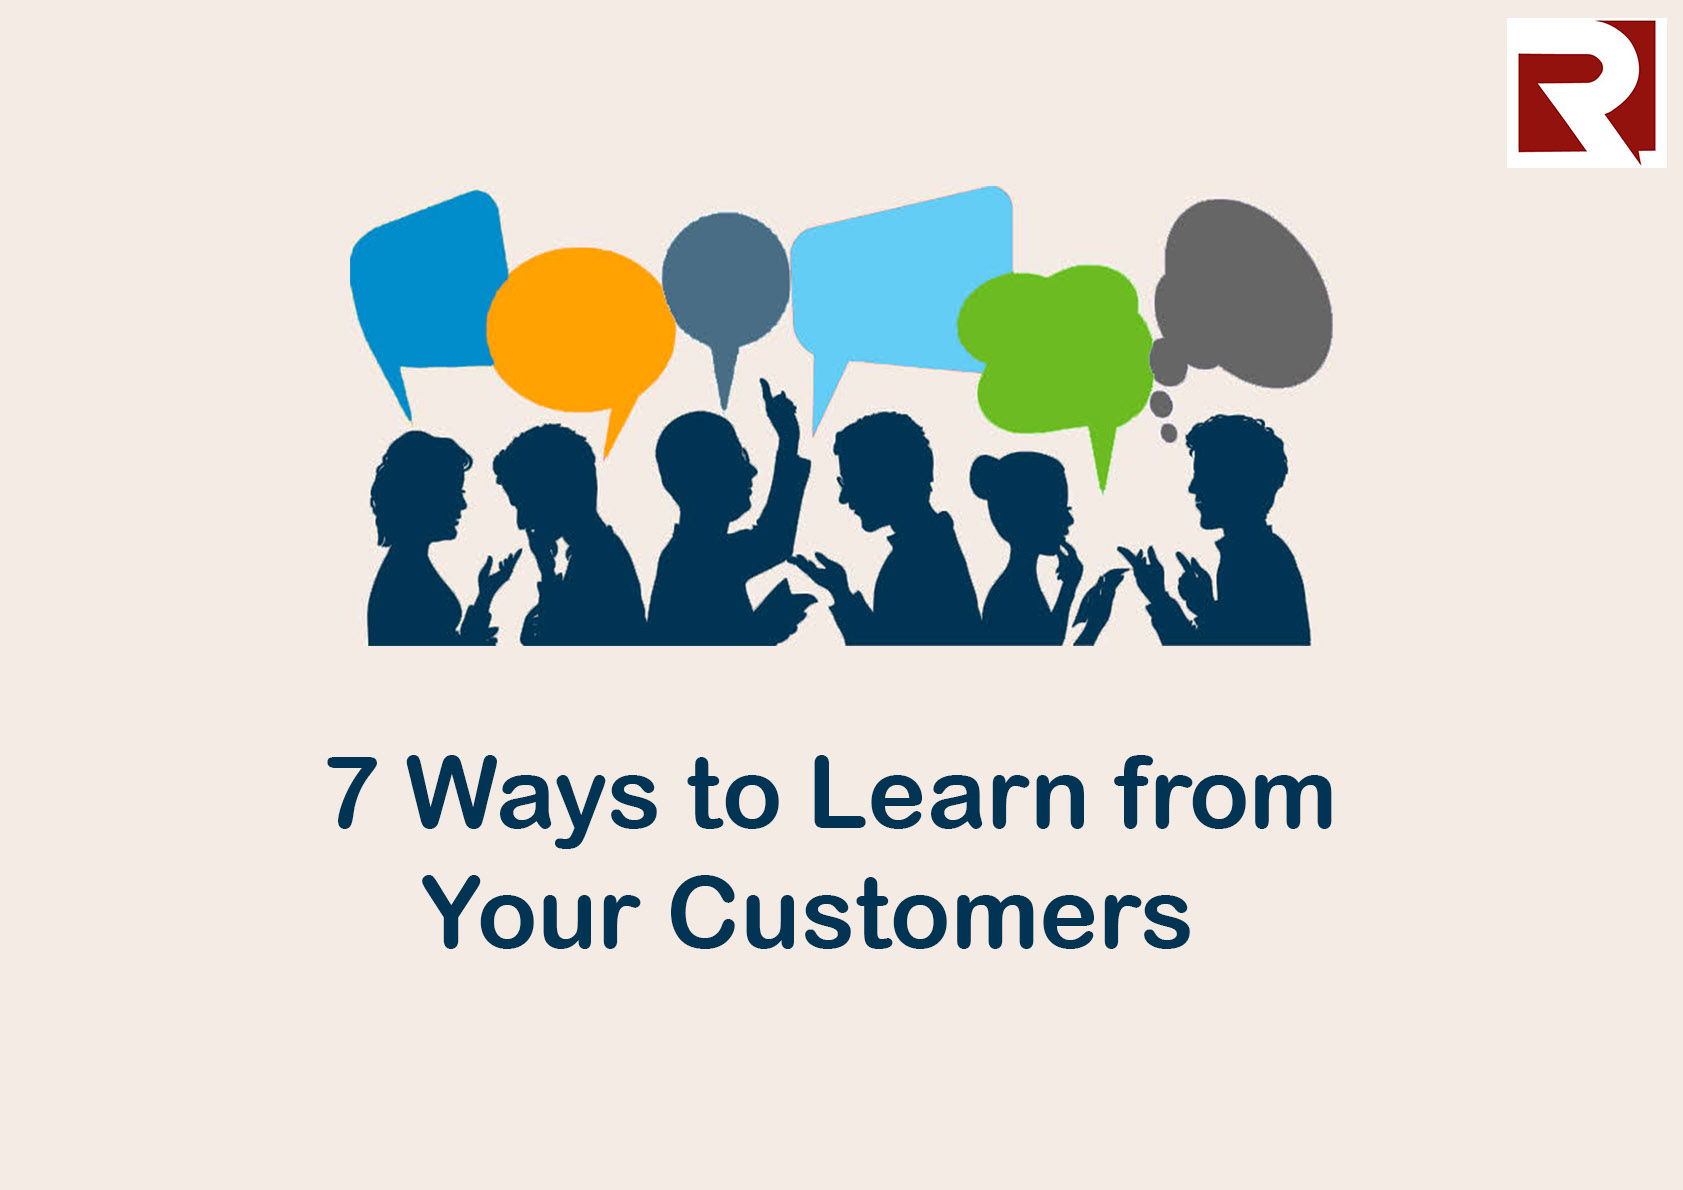 Seven Ways to Learn From Your Customers